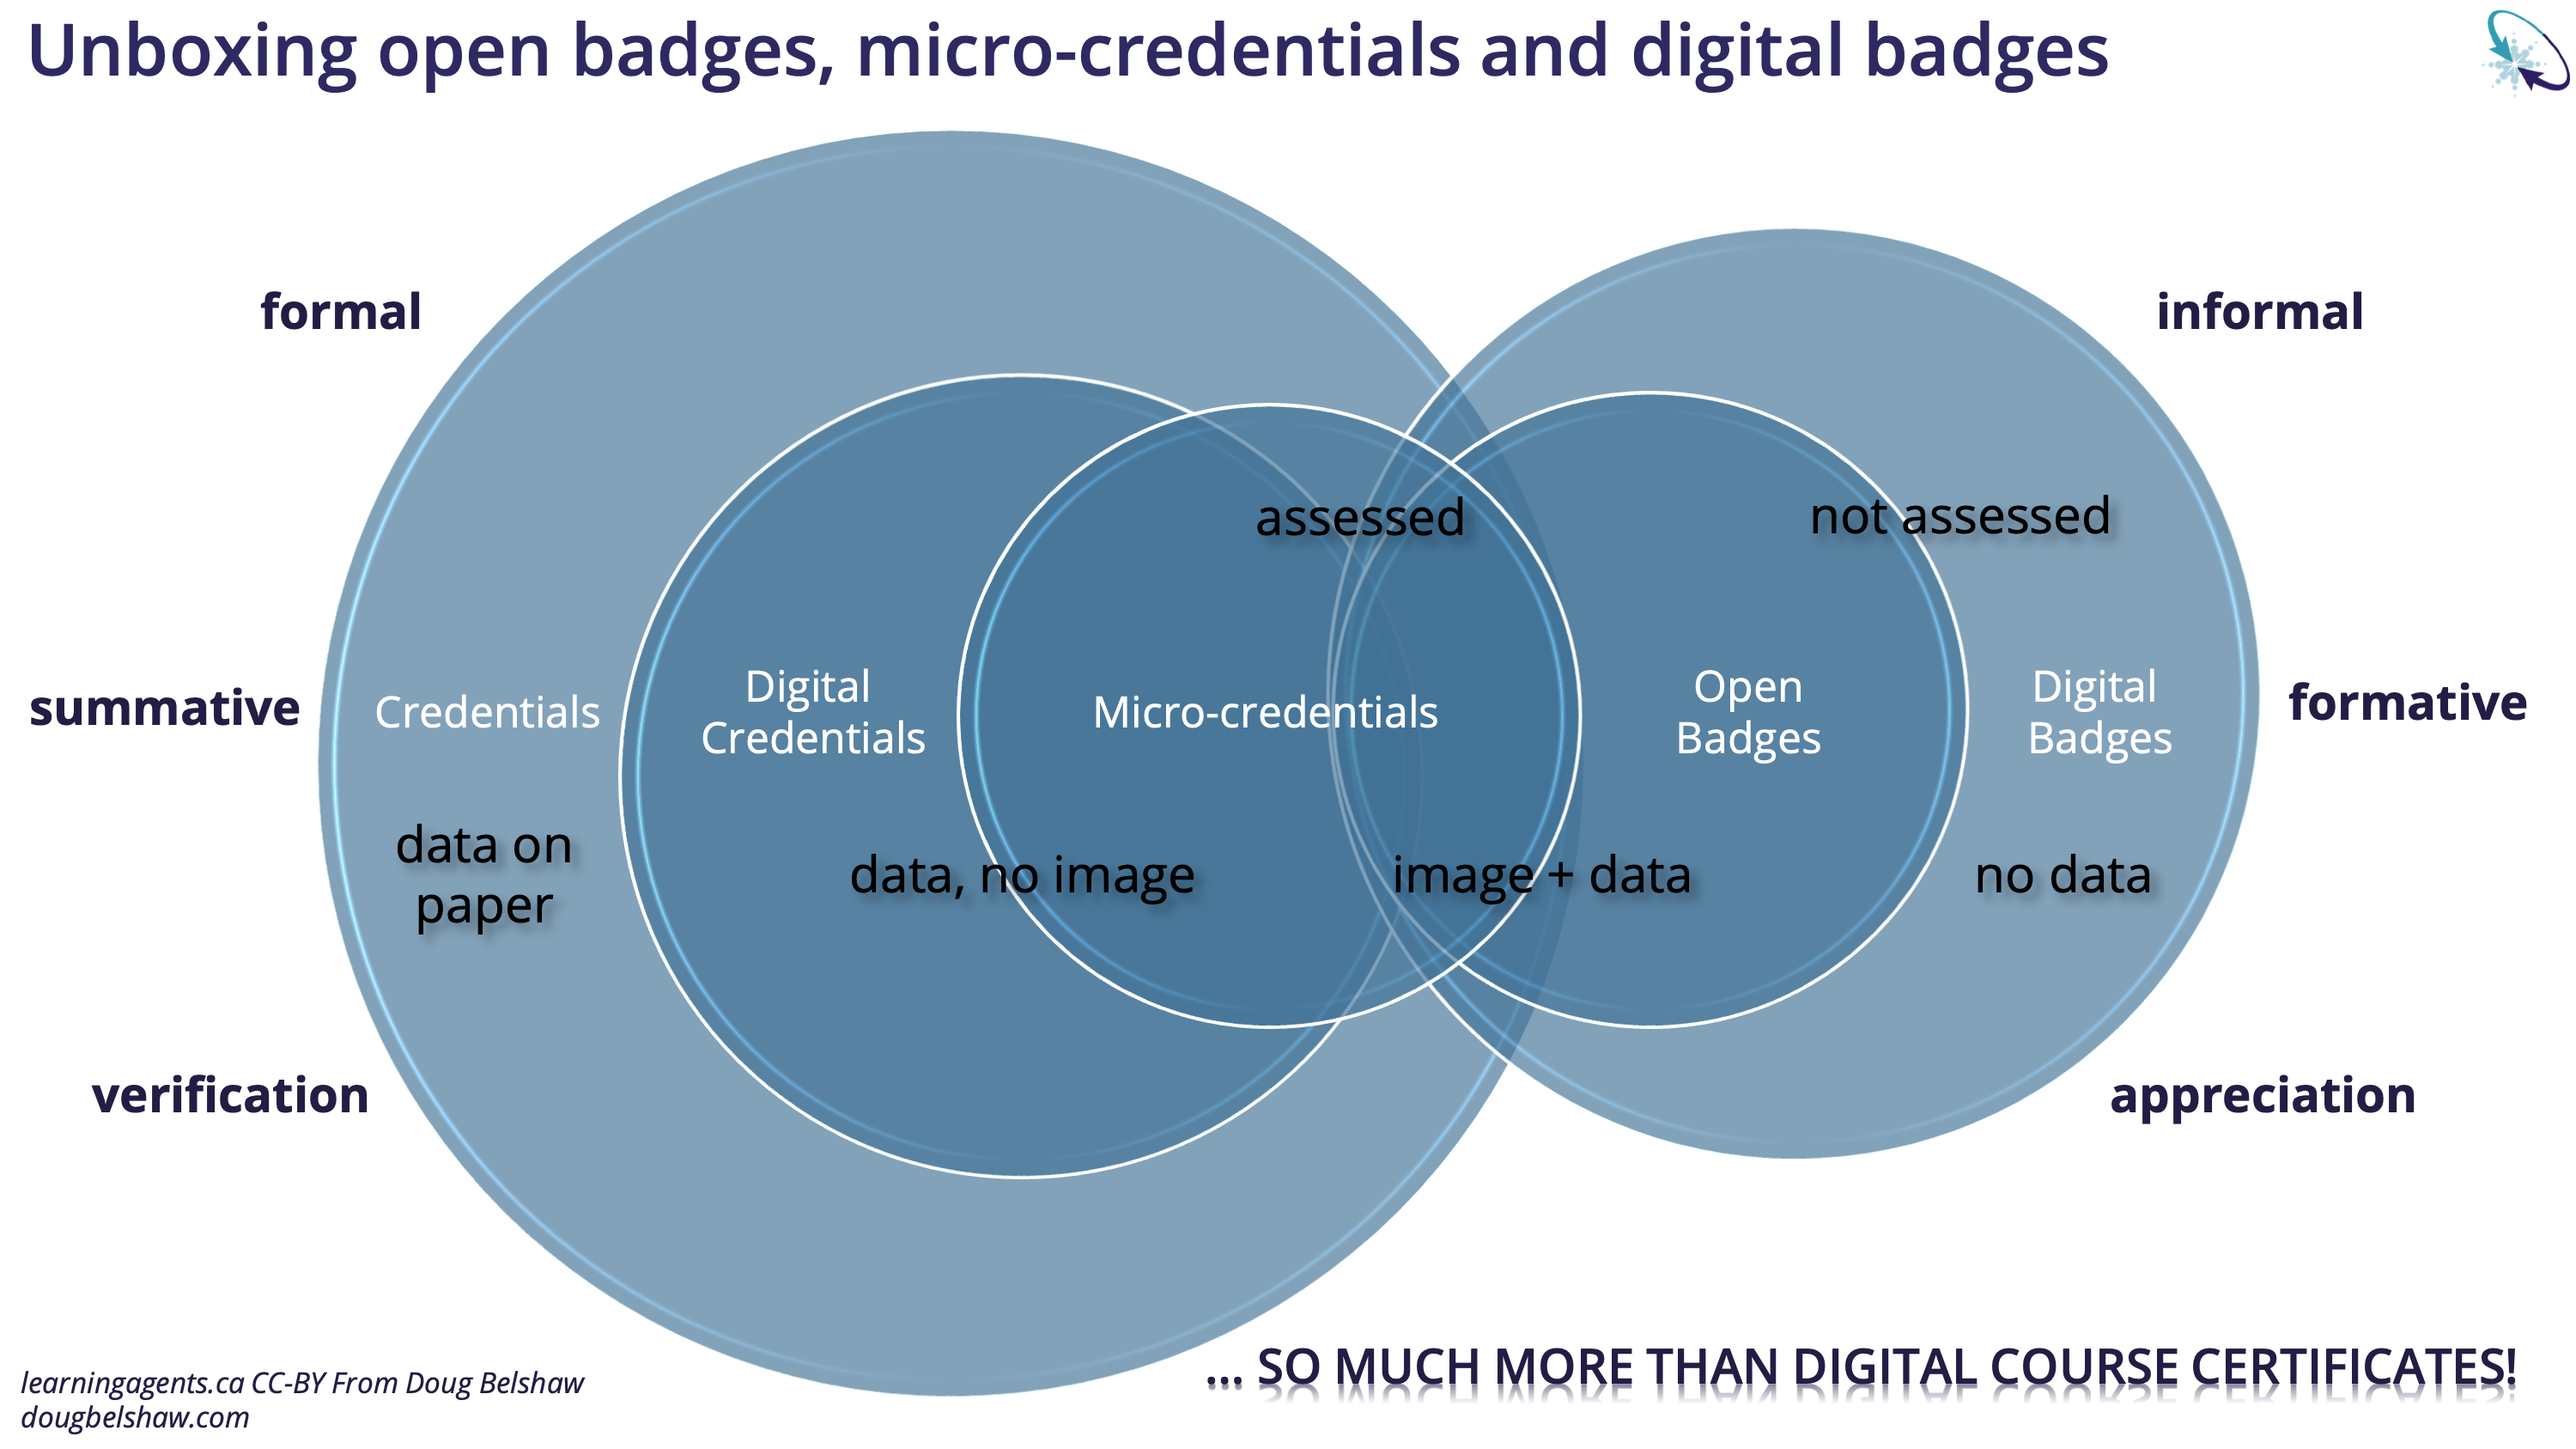 Badges and micro-credentials